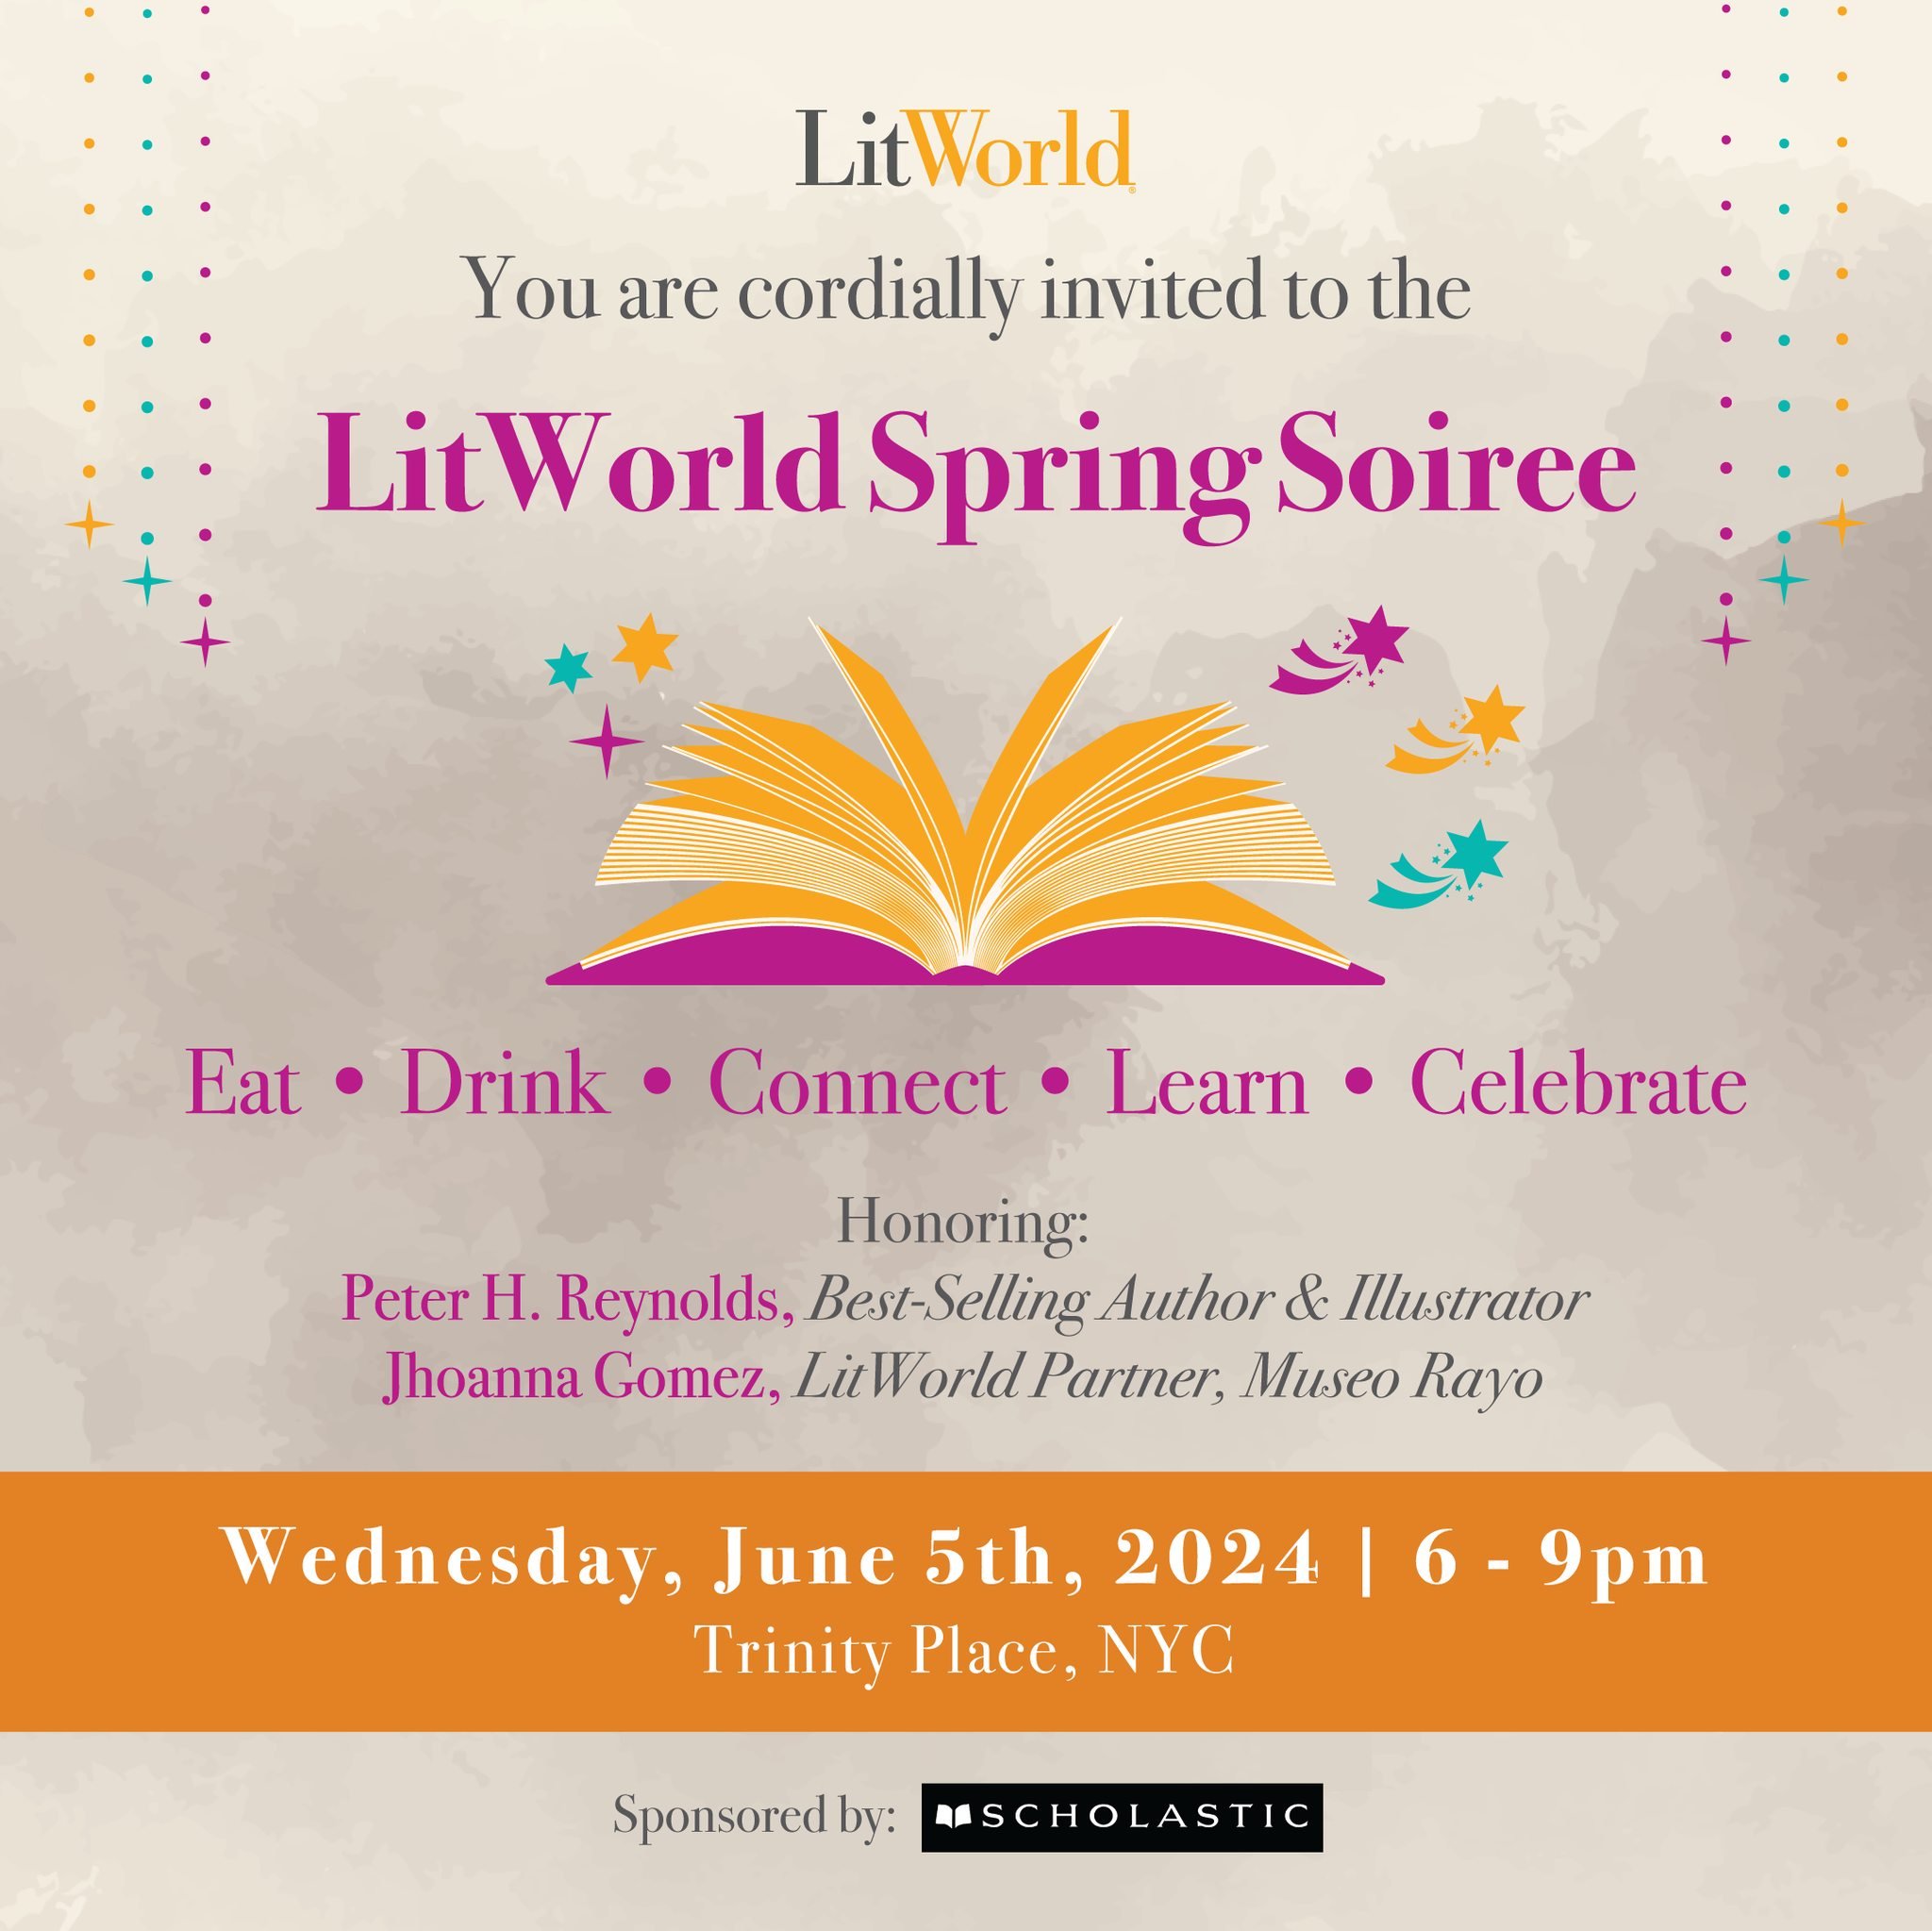 Spring has finally arrived here in NYC, and you are cordially invited to LitWorld&rsquo;s Spring Soiree on Wednesday, June 5th, at 6pm at @trinityplacenyc!

Join us for an intimate evening as we honor LitWorld&rsquo;s friend and champion - best-selli